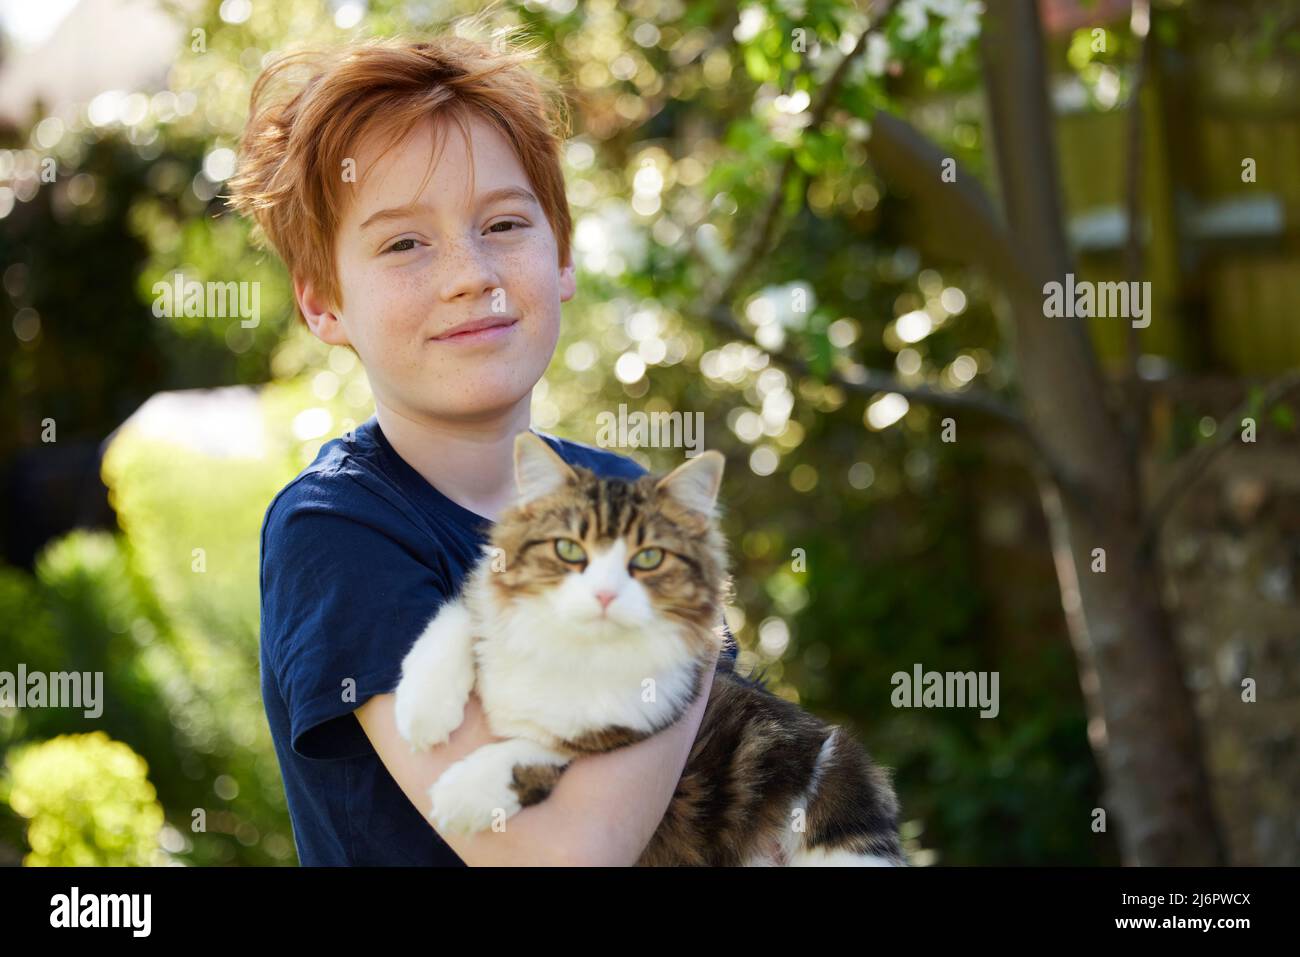 Portrait Of Smiling Boy Holding Pet Cat In Garden At Home Stock Photo